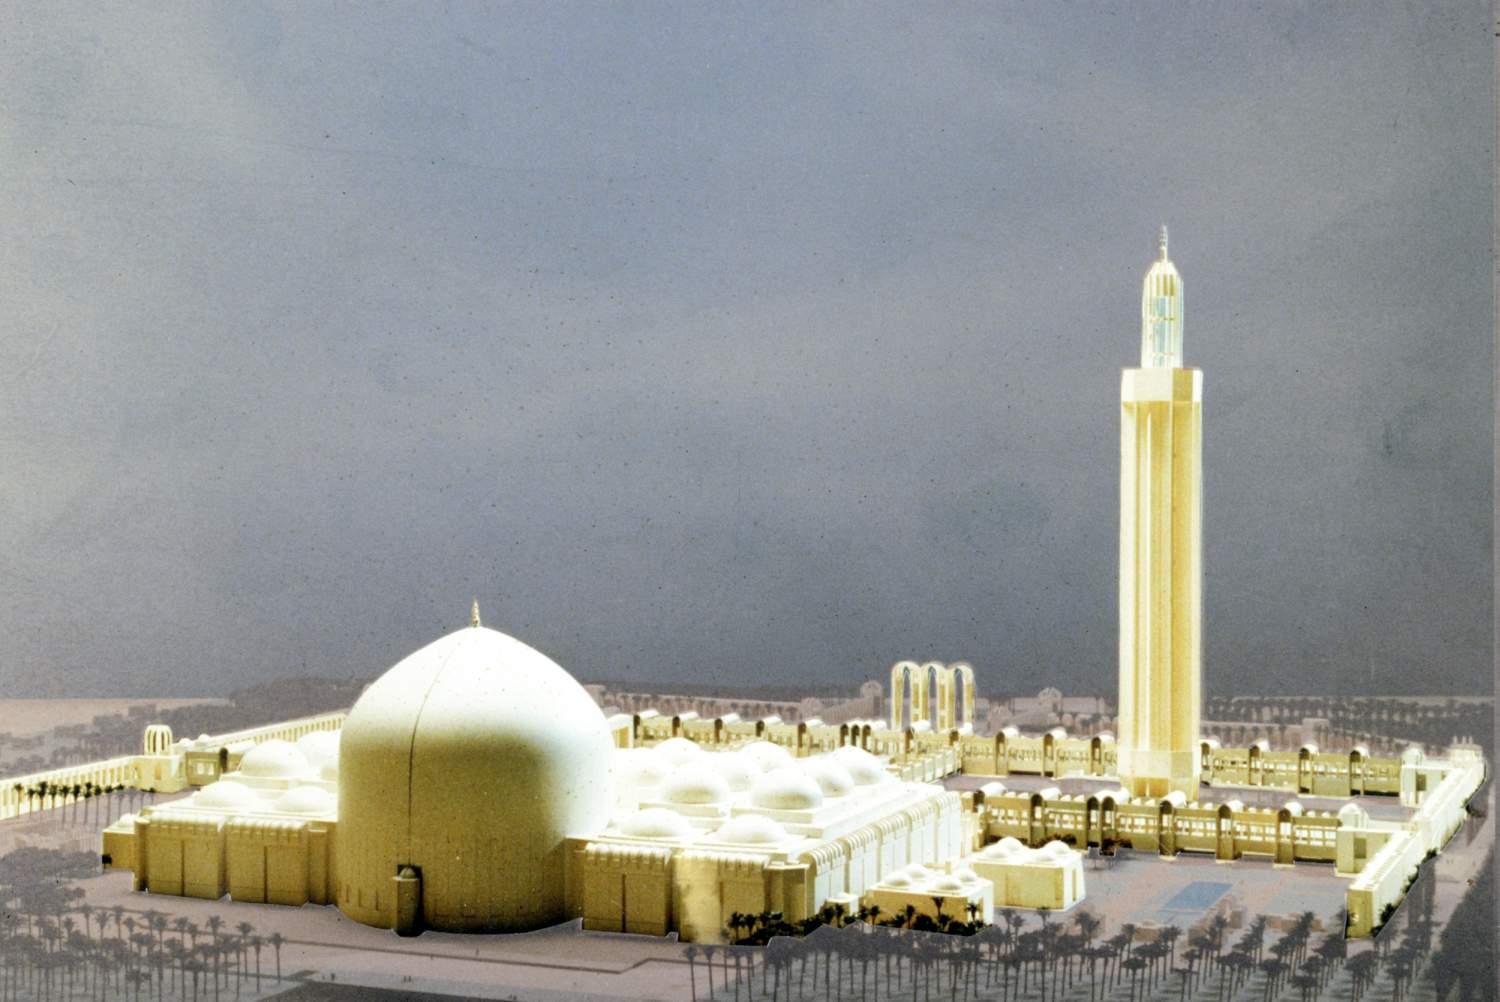 Baghdad State Mosque (Design) - <p>View of model with exterior of mihrab at the base of the main dome in foreground, to the multi-domed prayer hall, riwaq, boundary walls, minaret, and arches of the main entrance gate highlighted.</p>